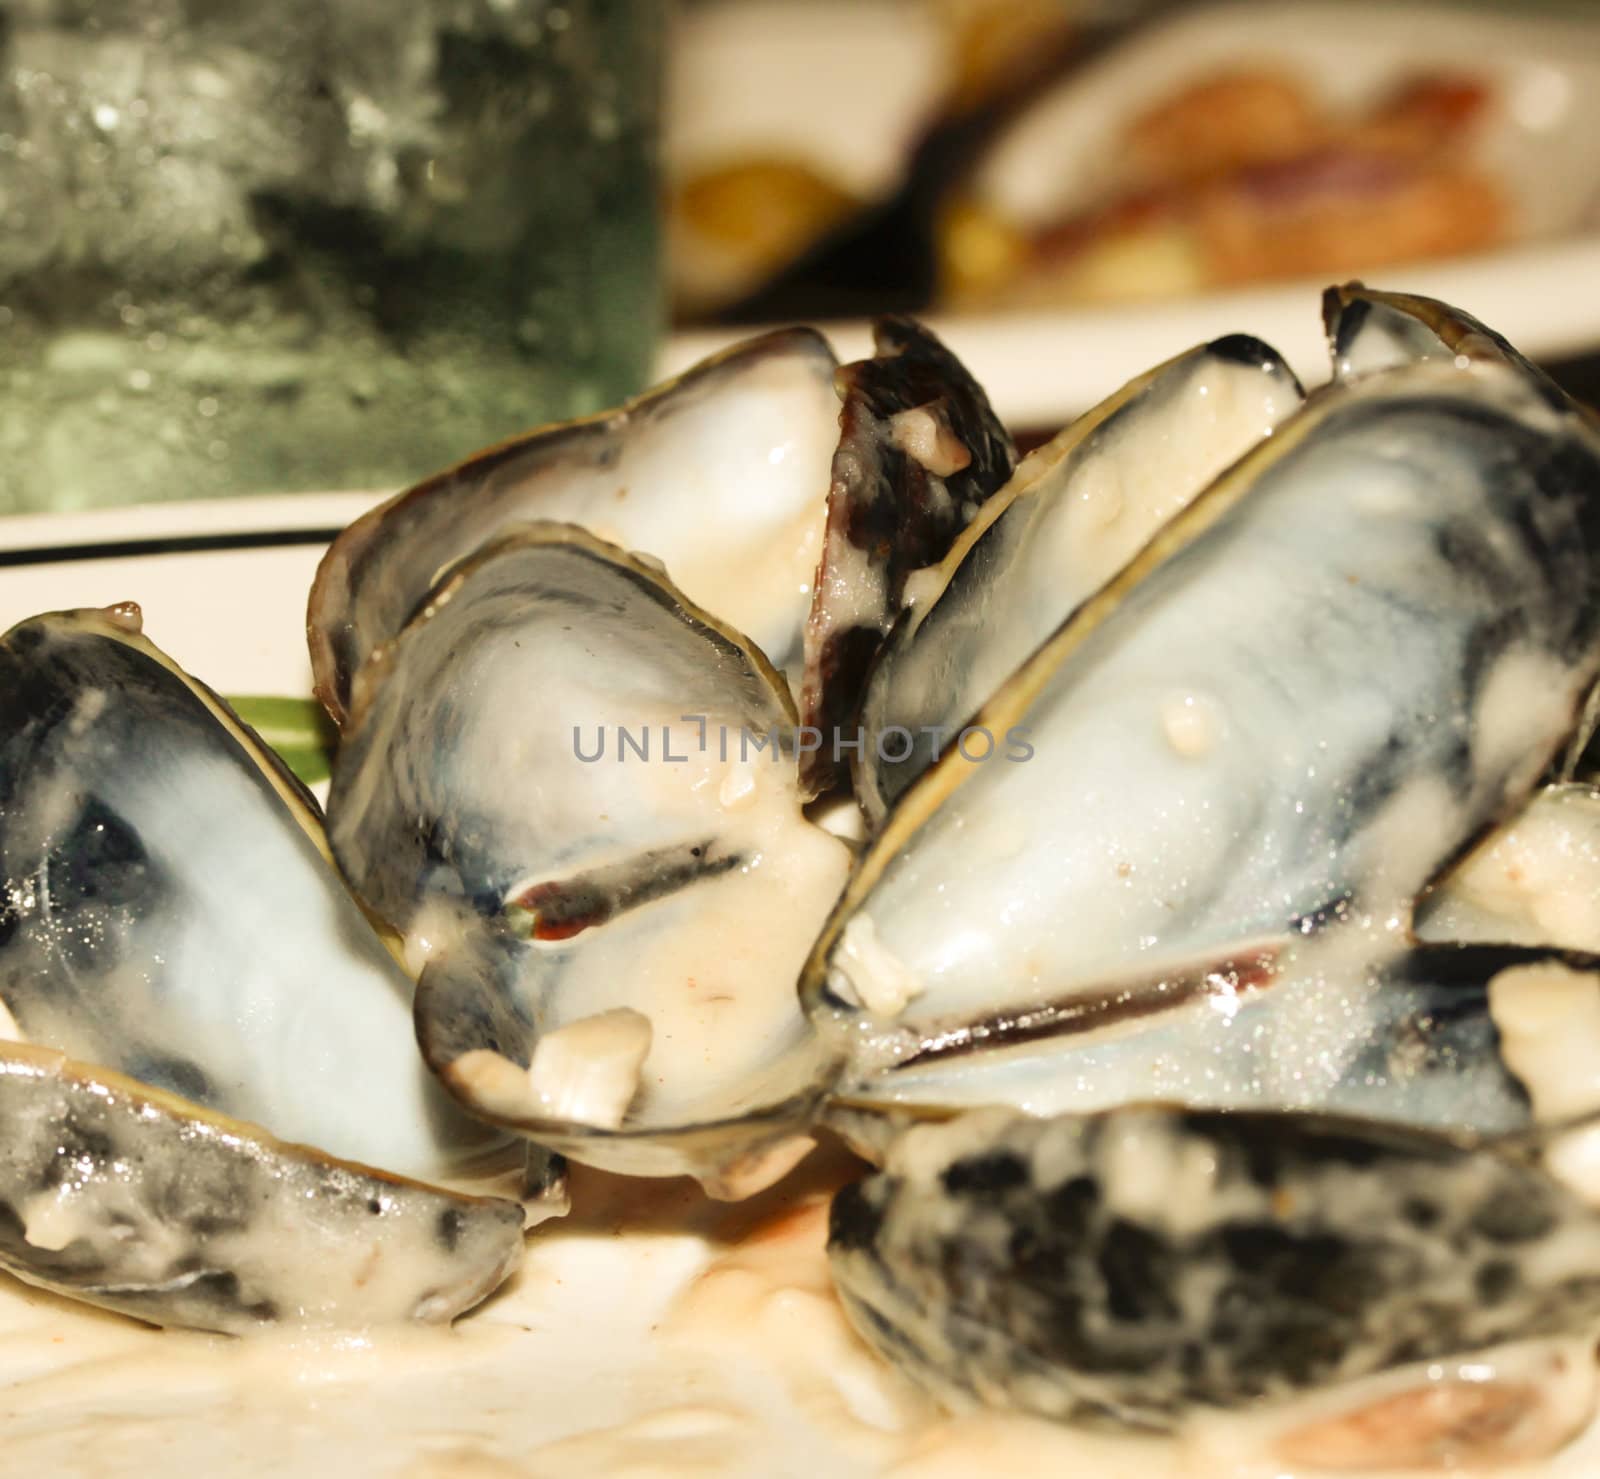 Close Up of Partially Eaten Mussels